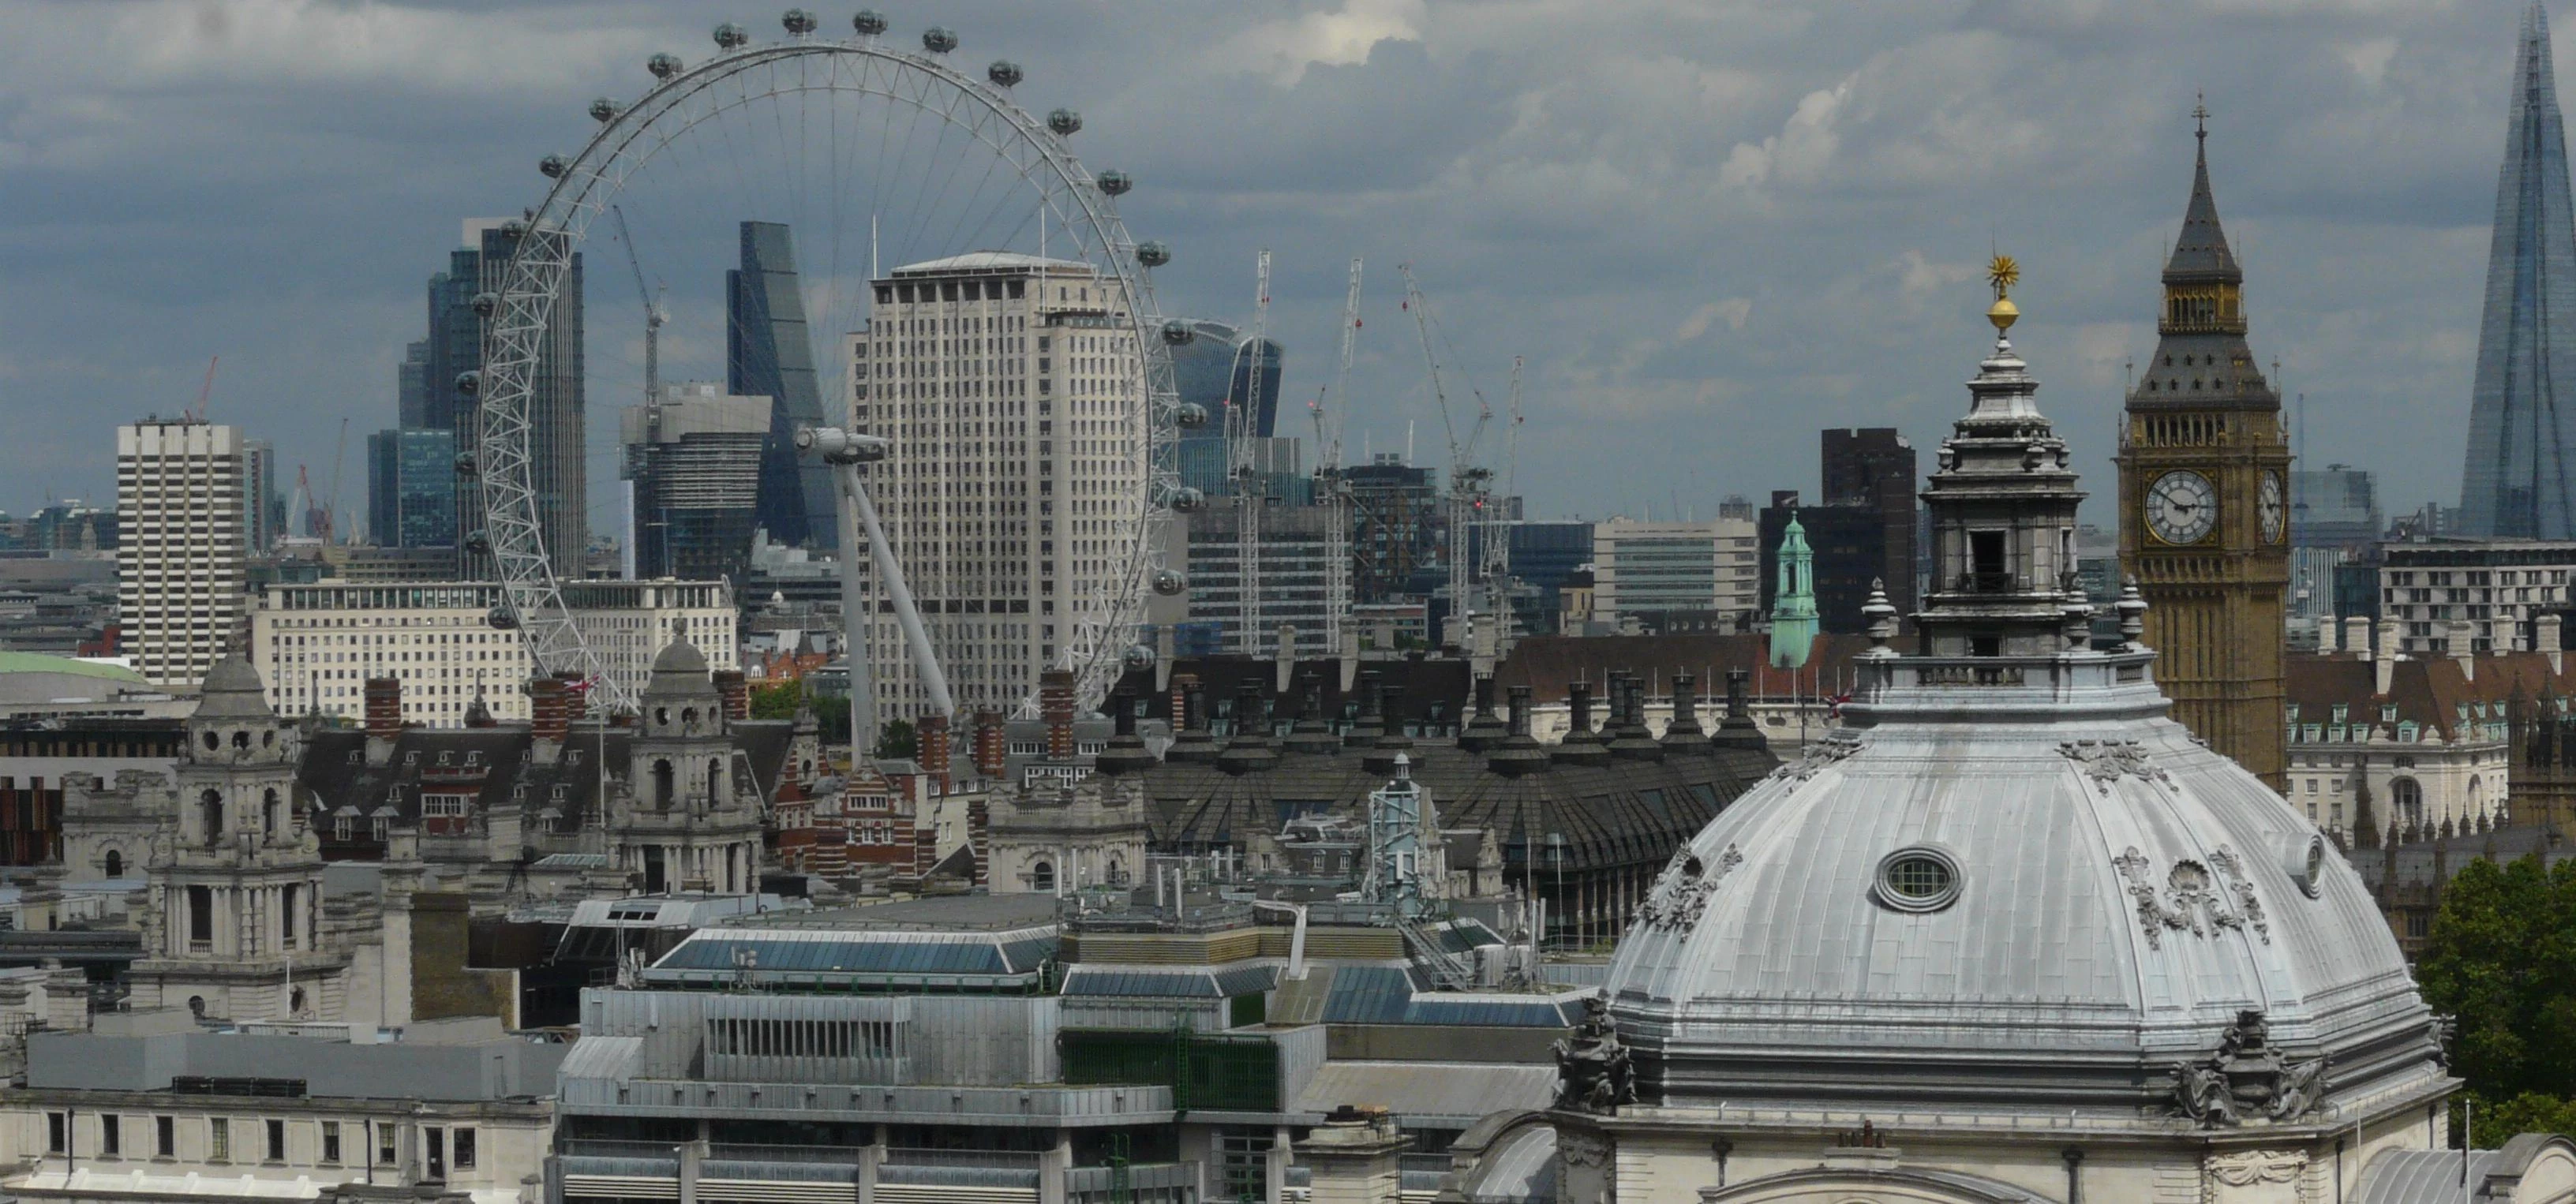 The City, The Eye and The Shard From 55 Broadway